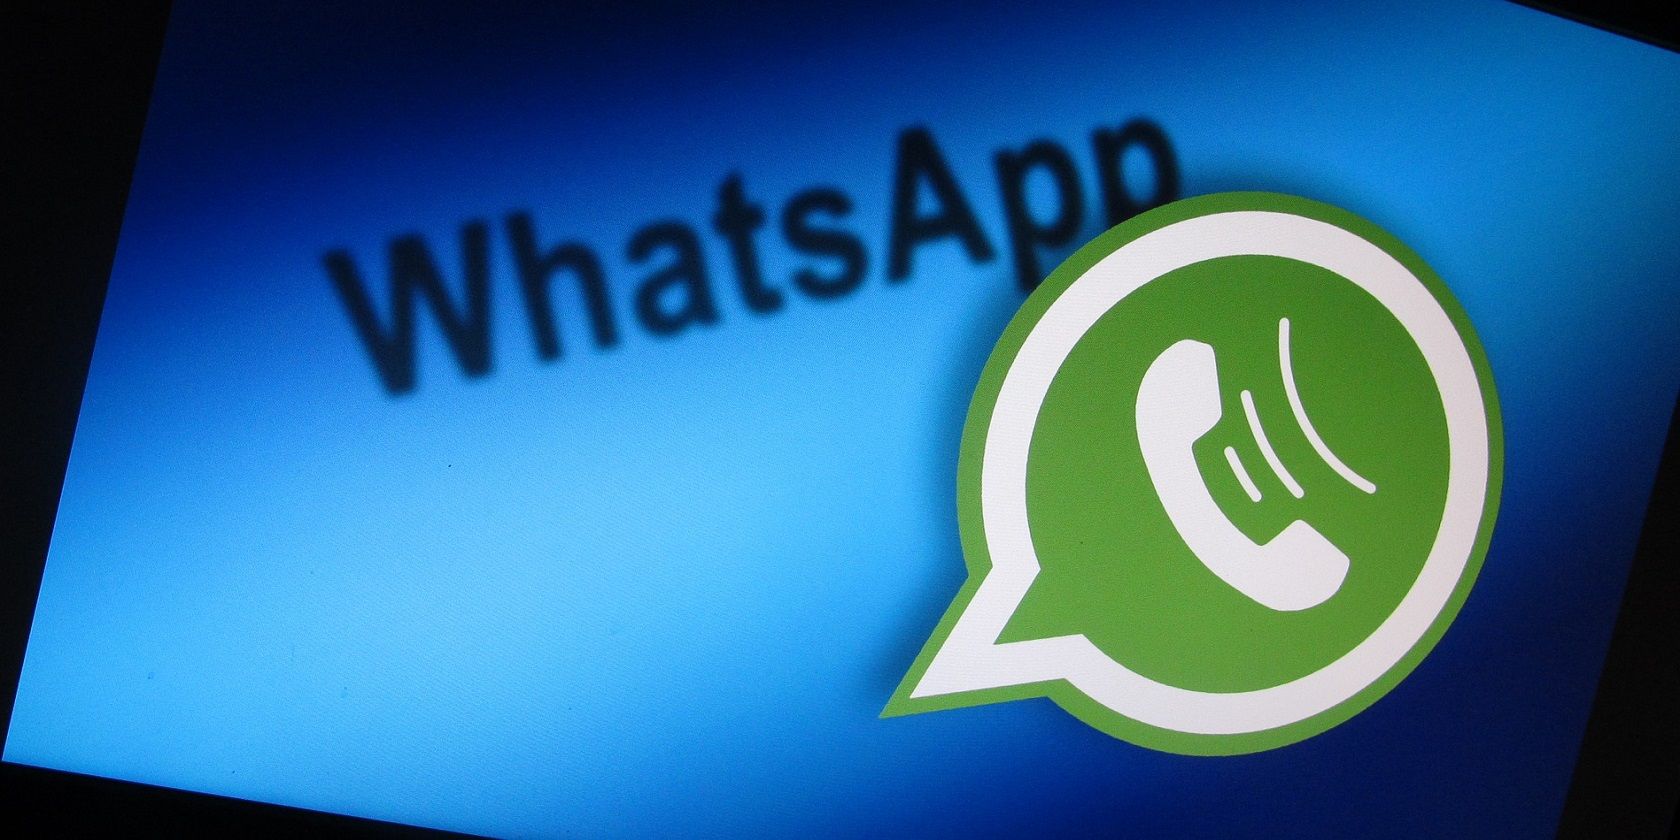 download whatsapp media from iphone to pc